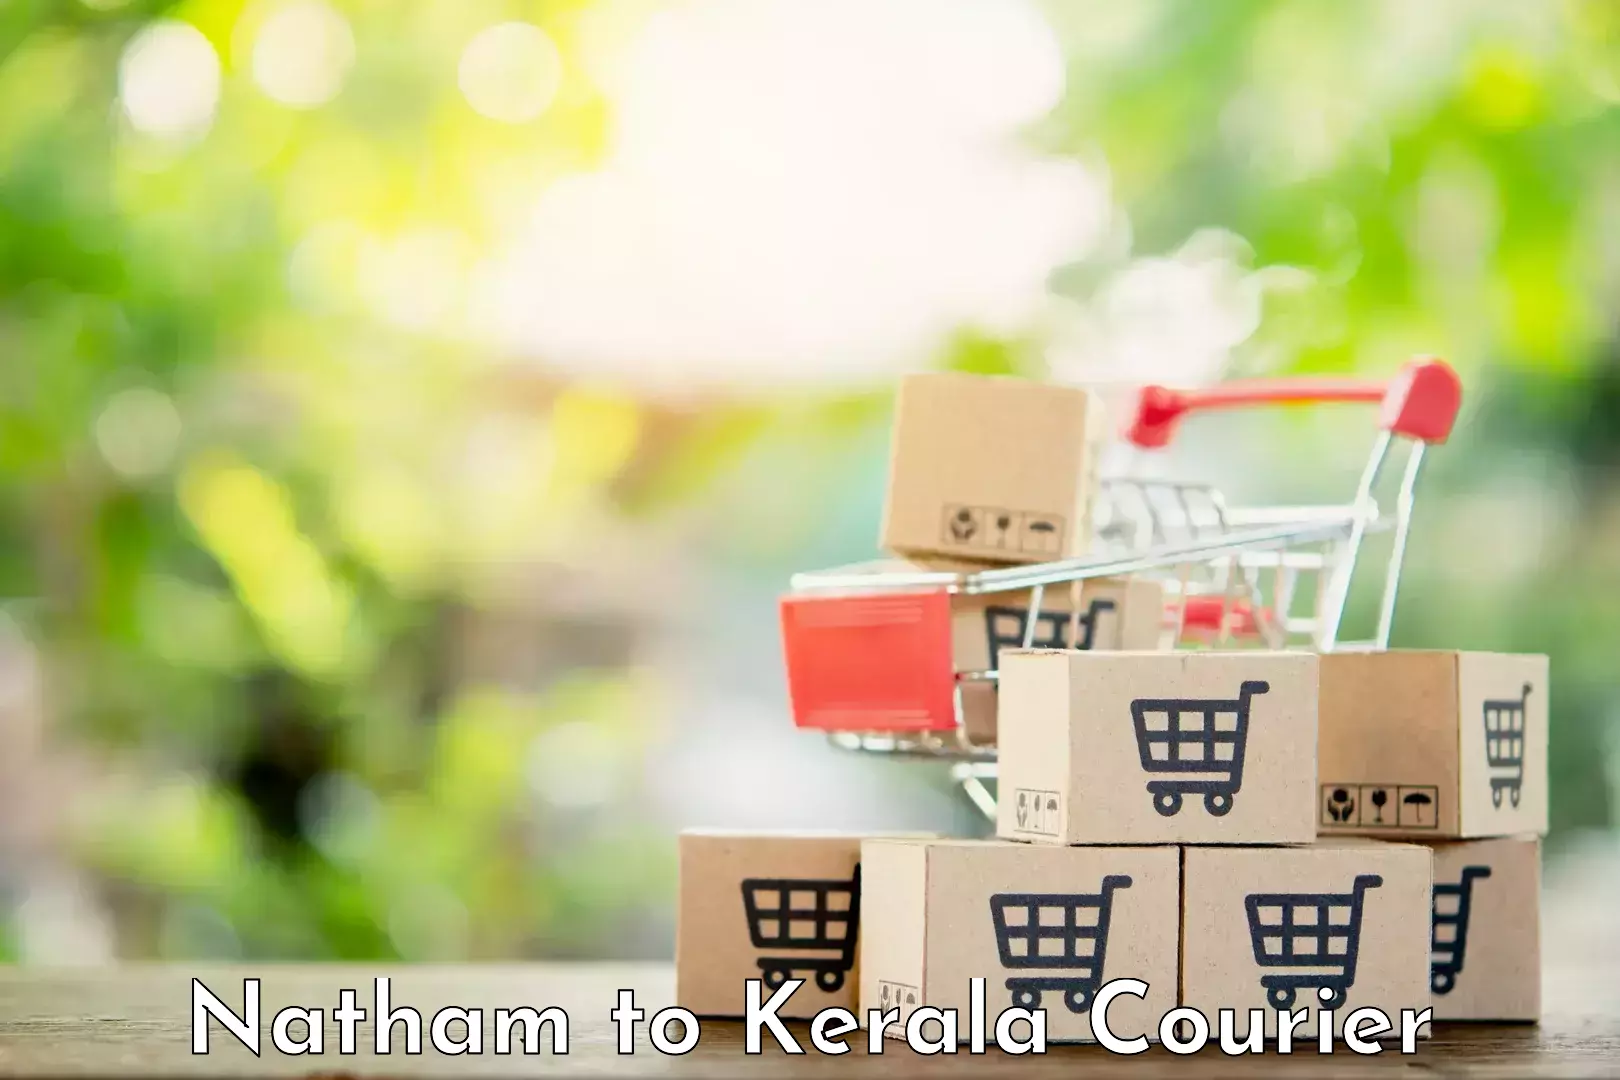 State-of-the-art courier technology Natham to Edappal